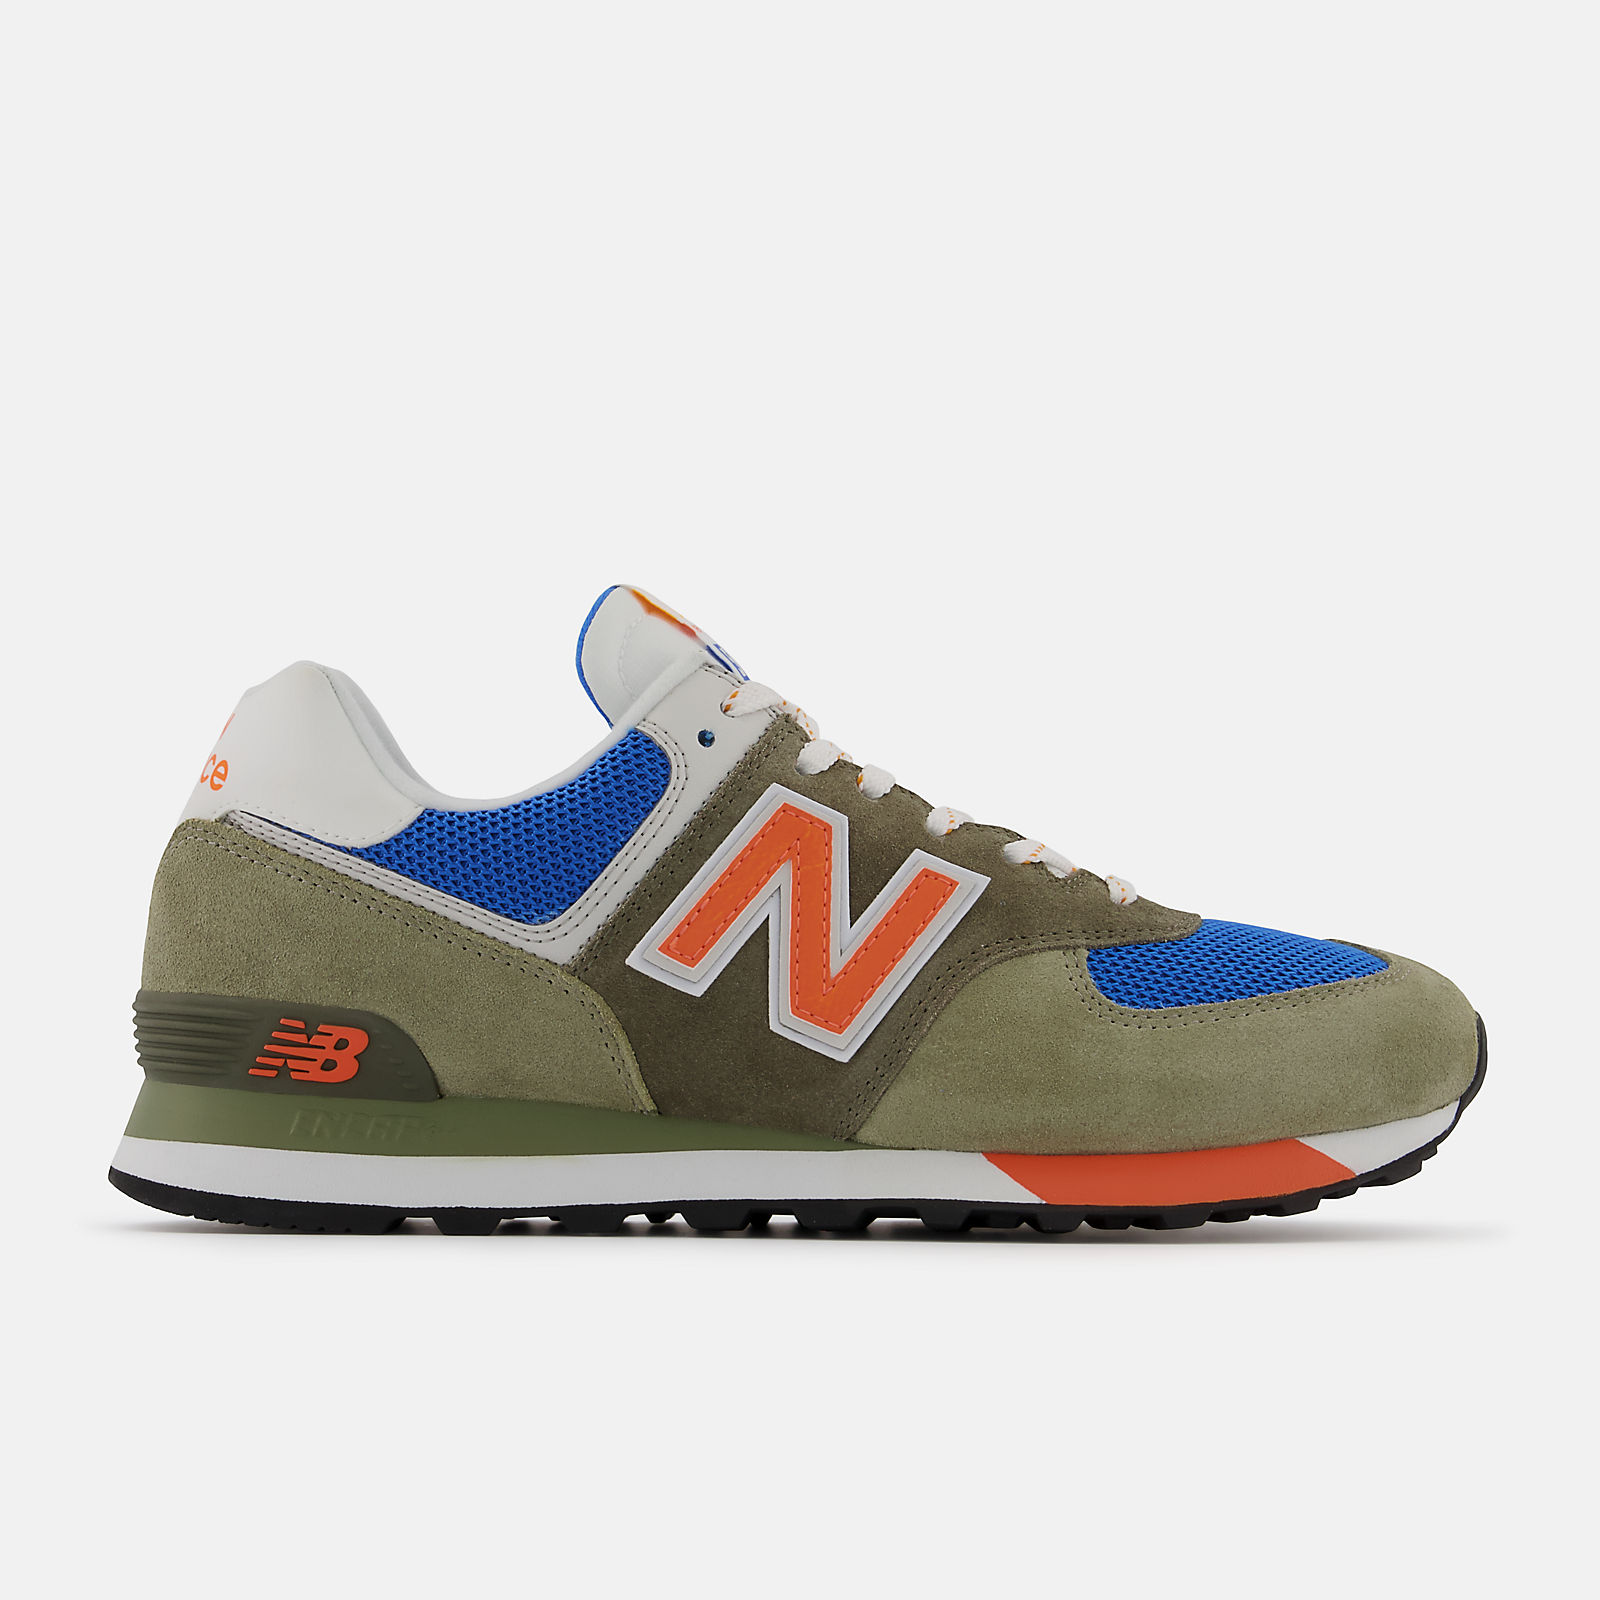 Furnace Essentially trigger 574 - Joe's New Balance Outlet